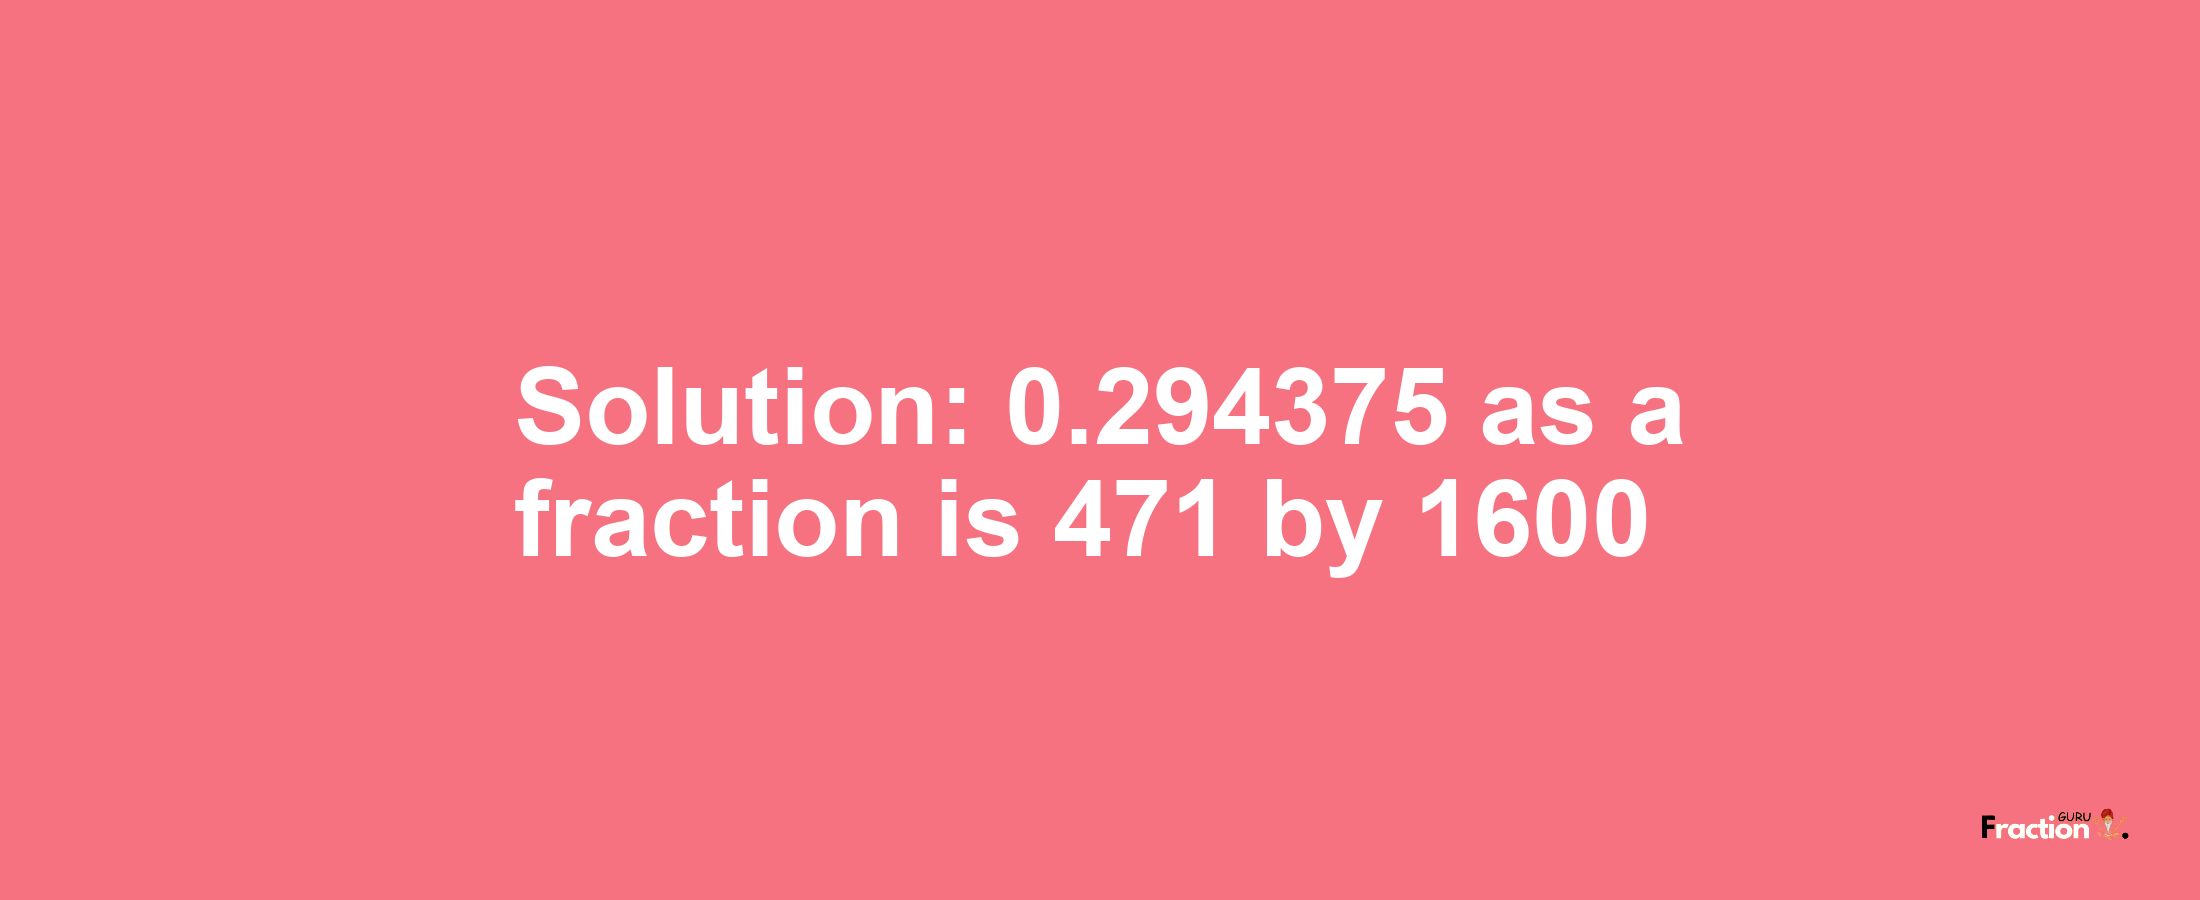 Solution:0.294375 as a fraction is 471/1600